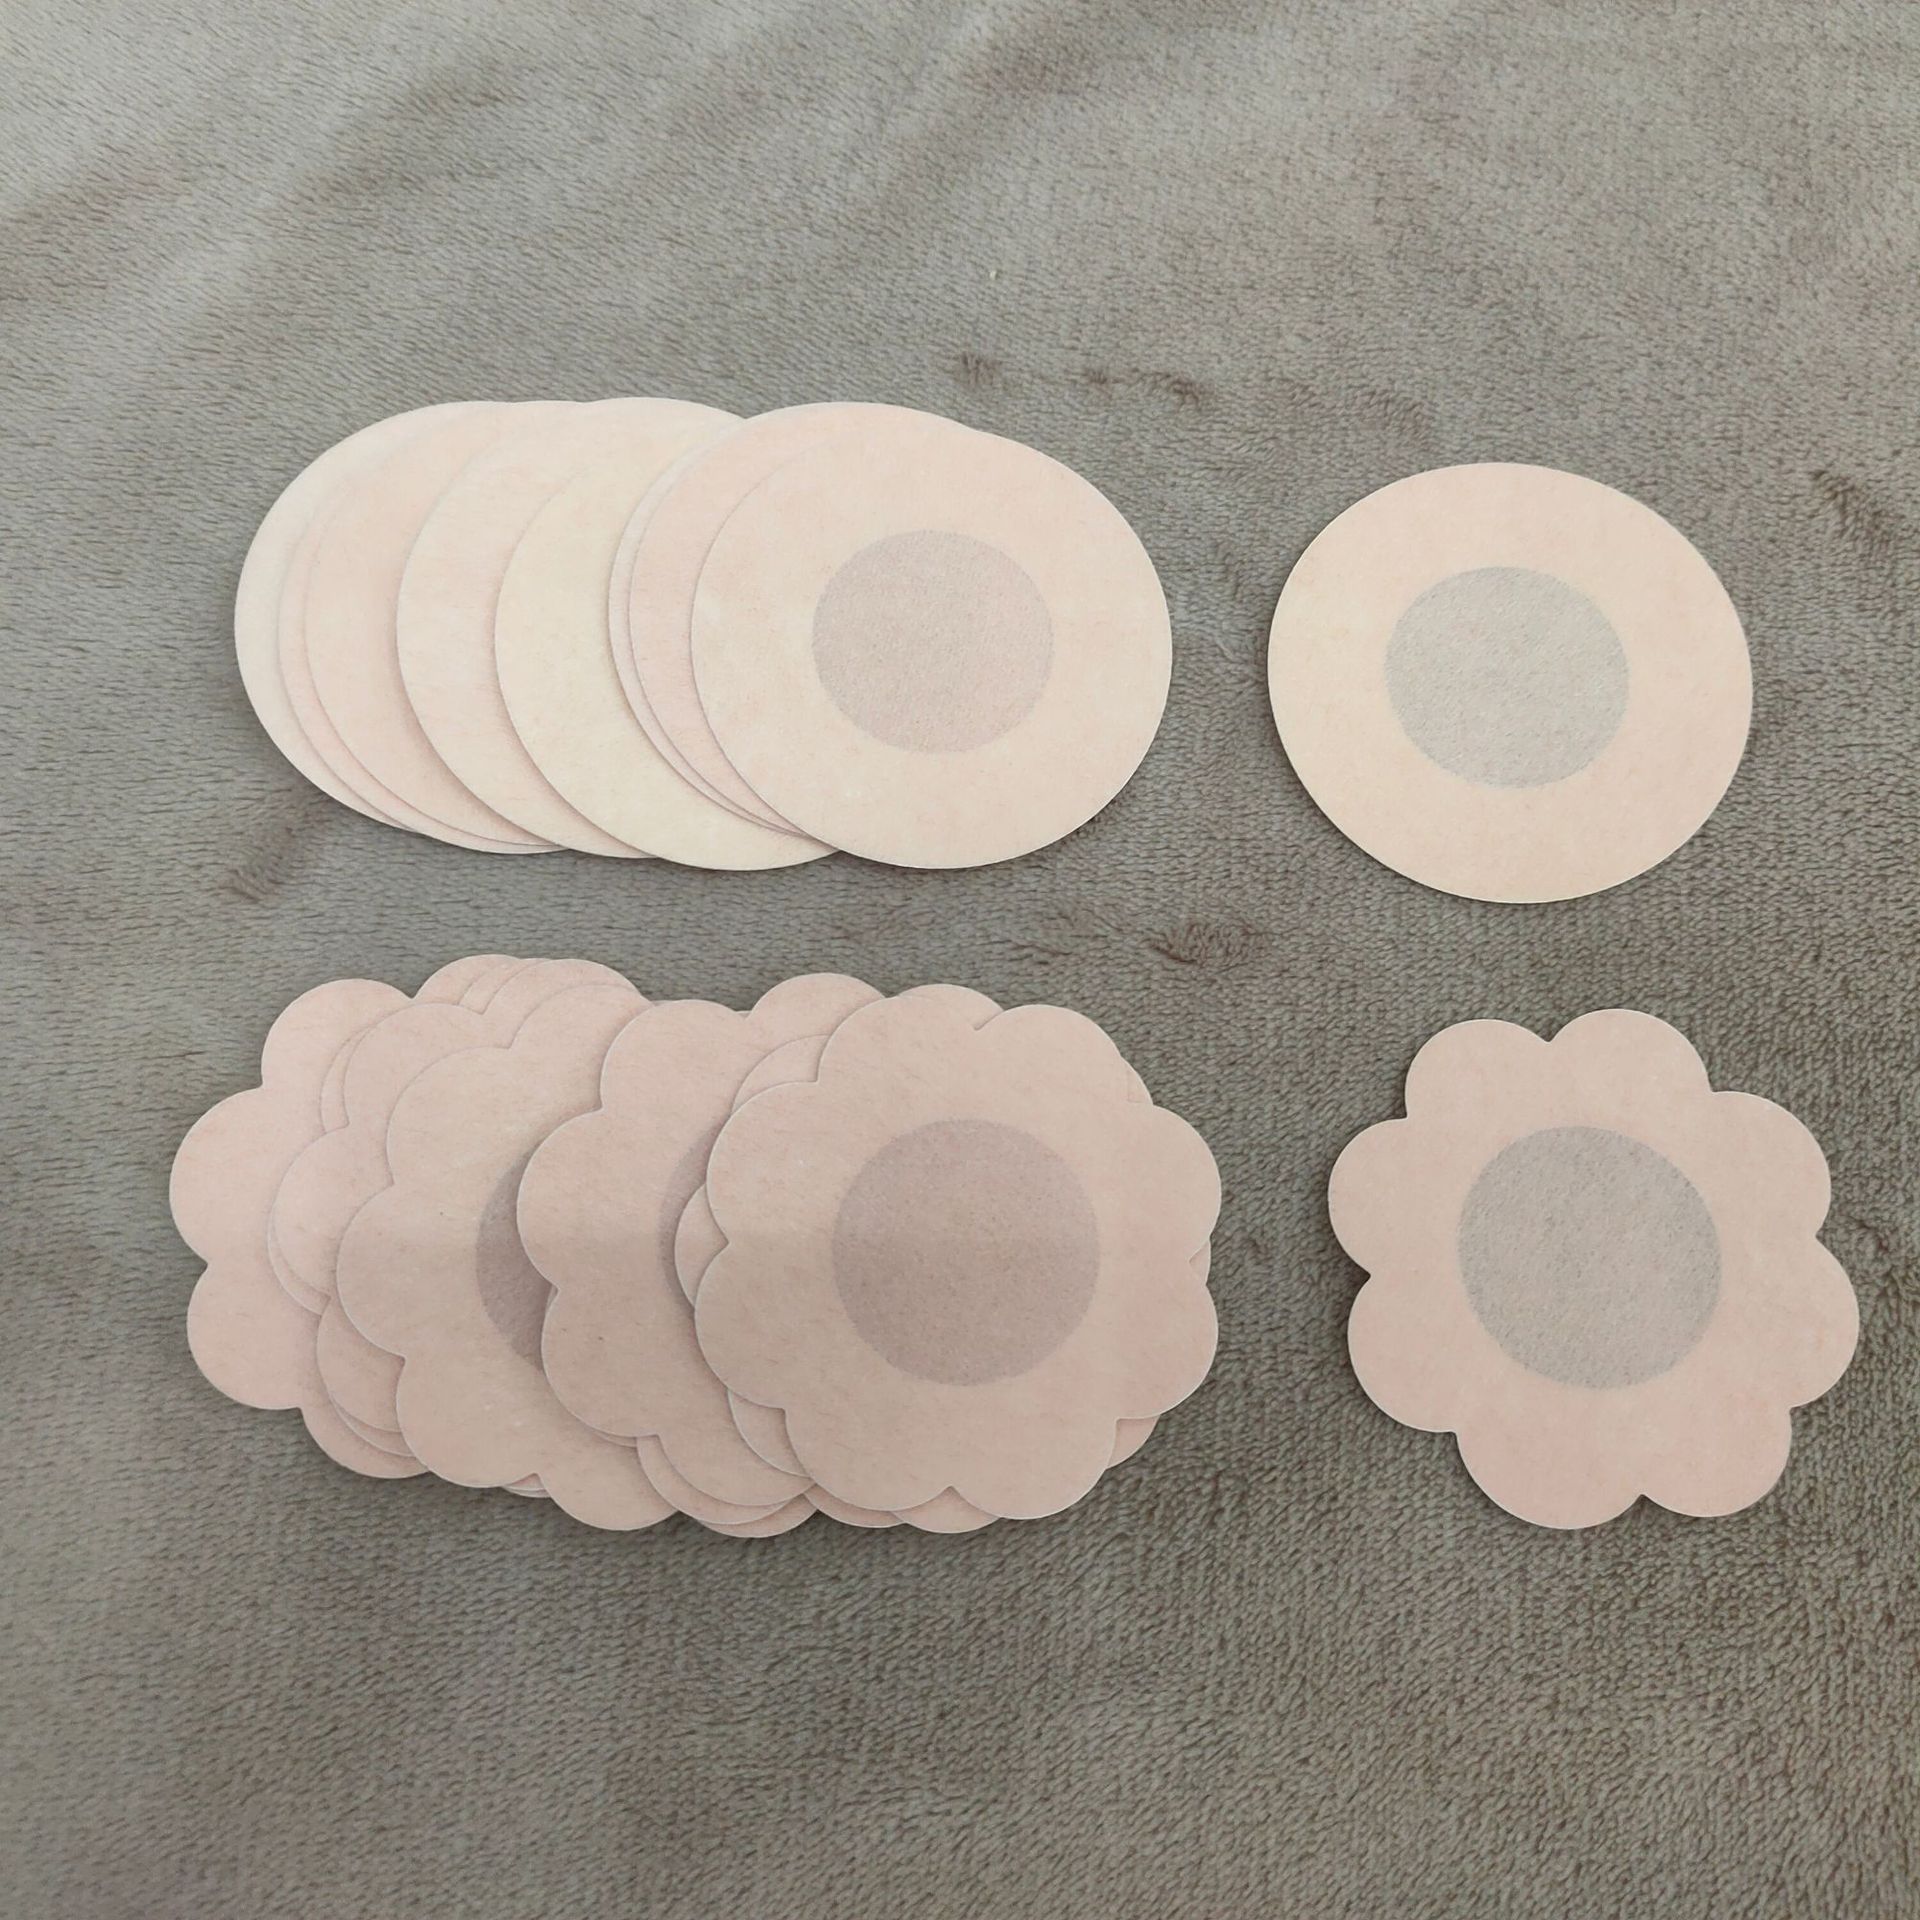 Invisible Breathable Non-Woven Fabric， silk Cloth Nipple Stickers Biological Adhesive Chest Stickers Small Breast Stickers Anti-Bump Anti-Exposure